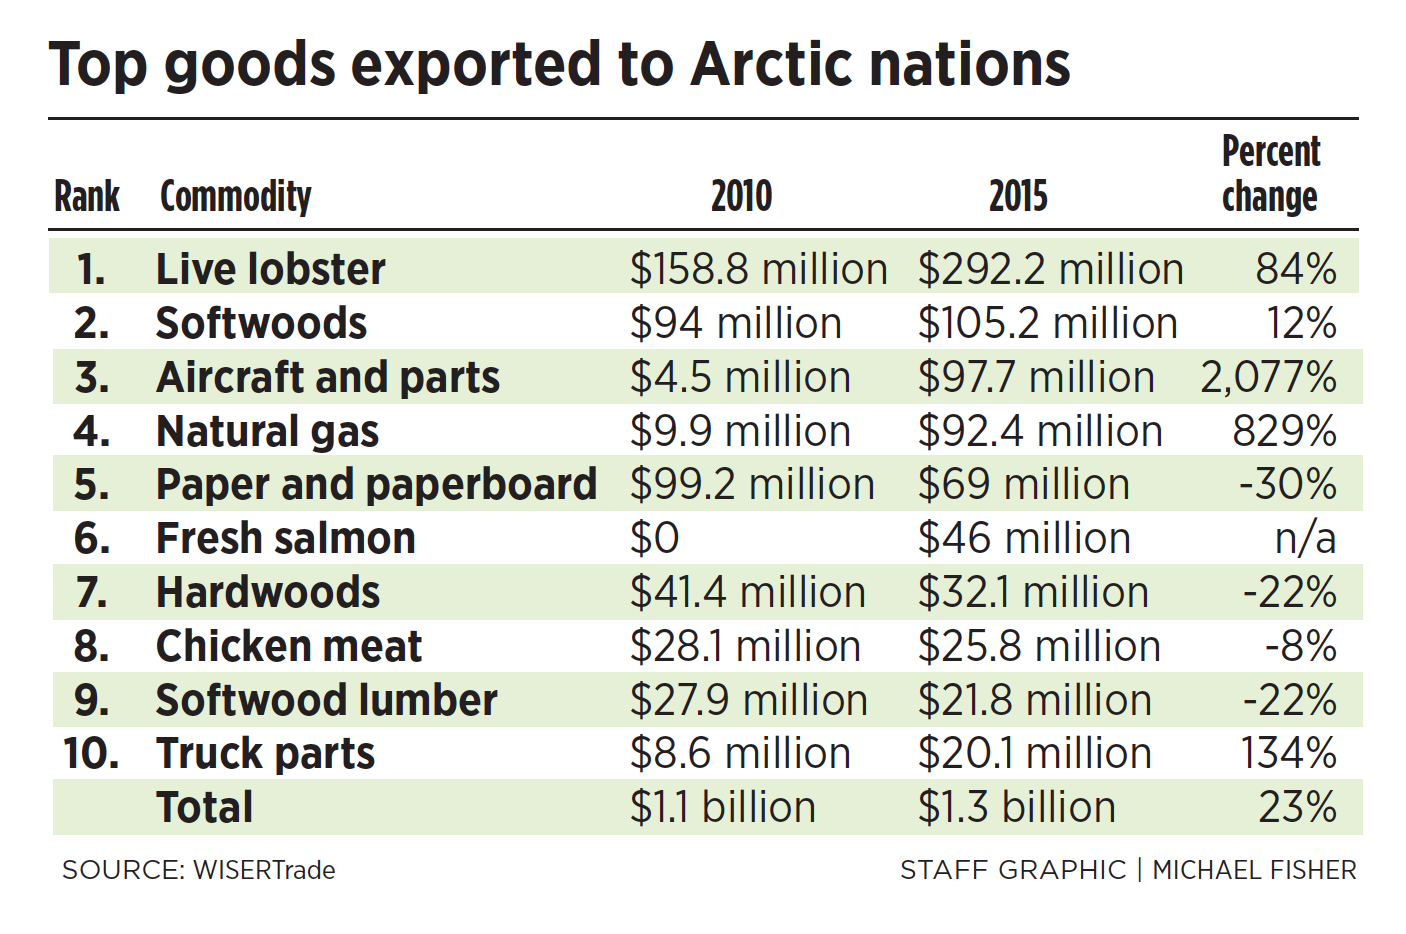 Top goods exported to Arctic nations